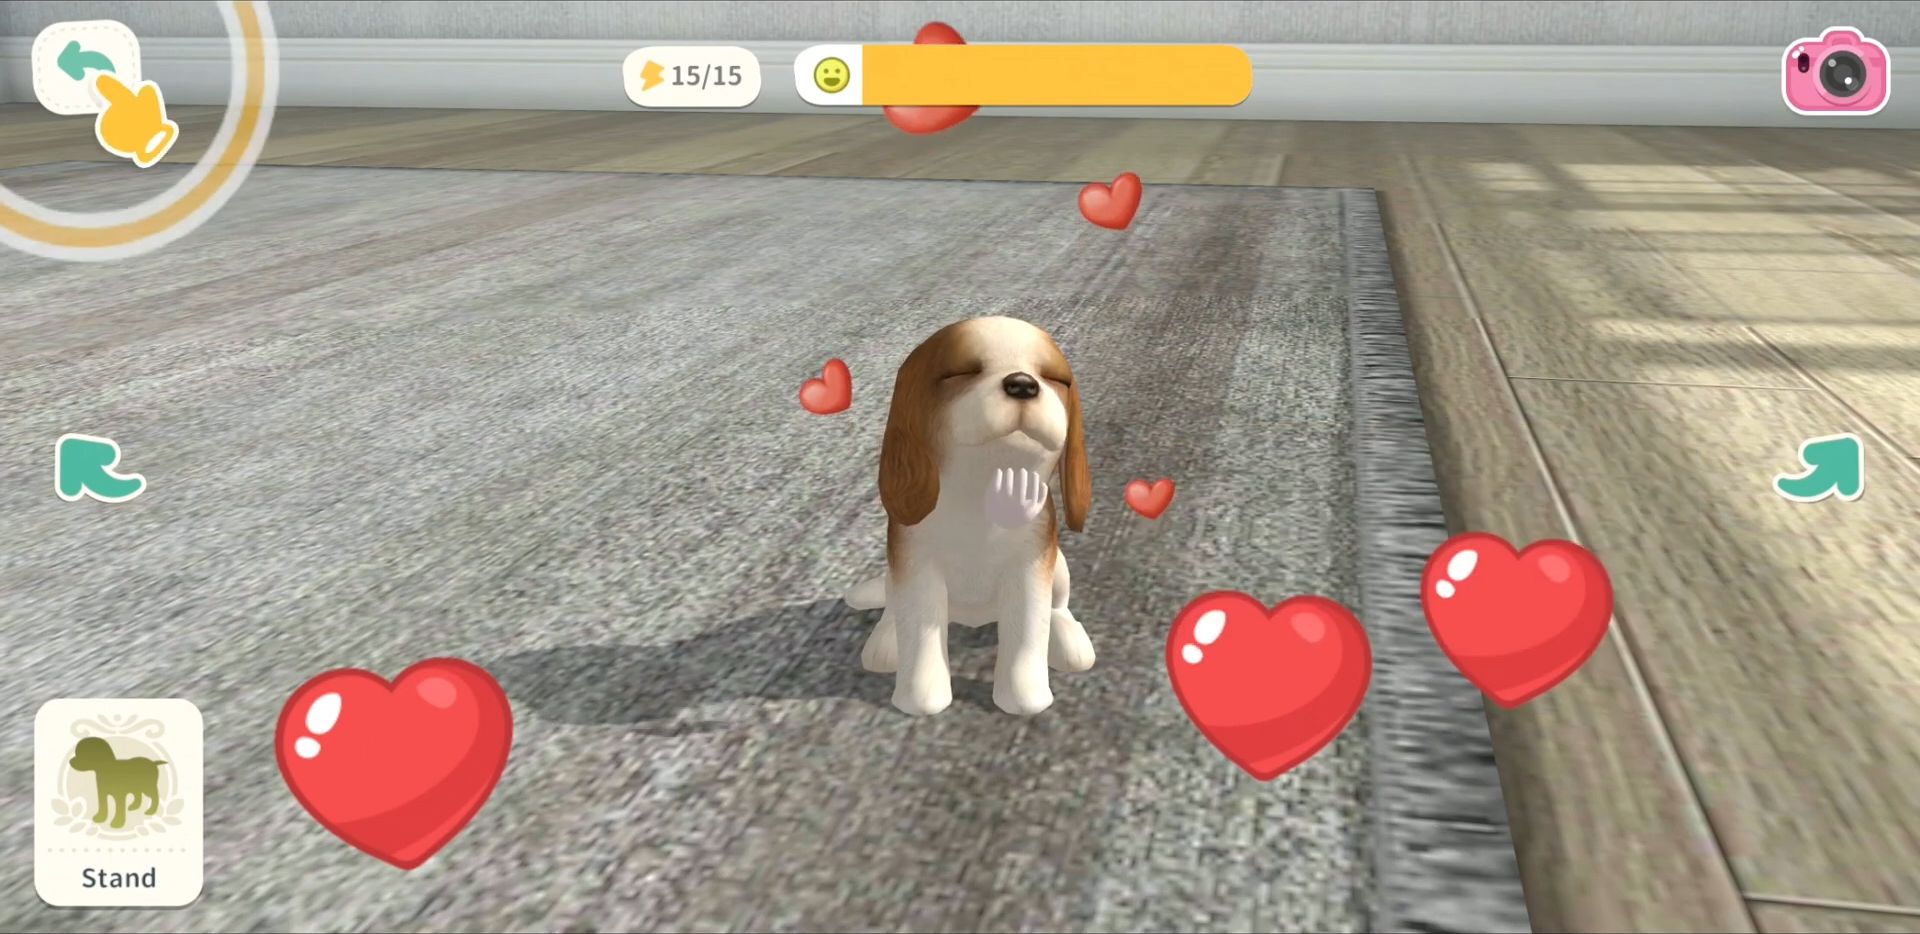 Adopt Puppies для Android